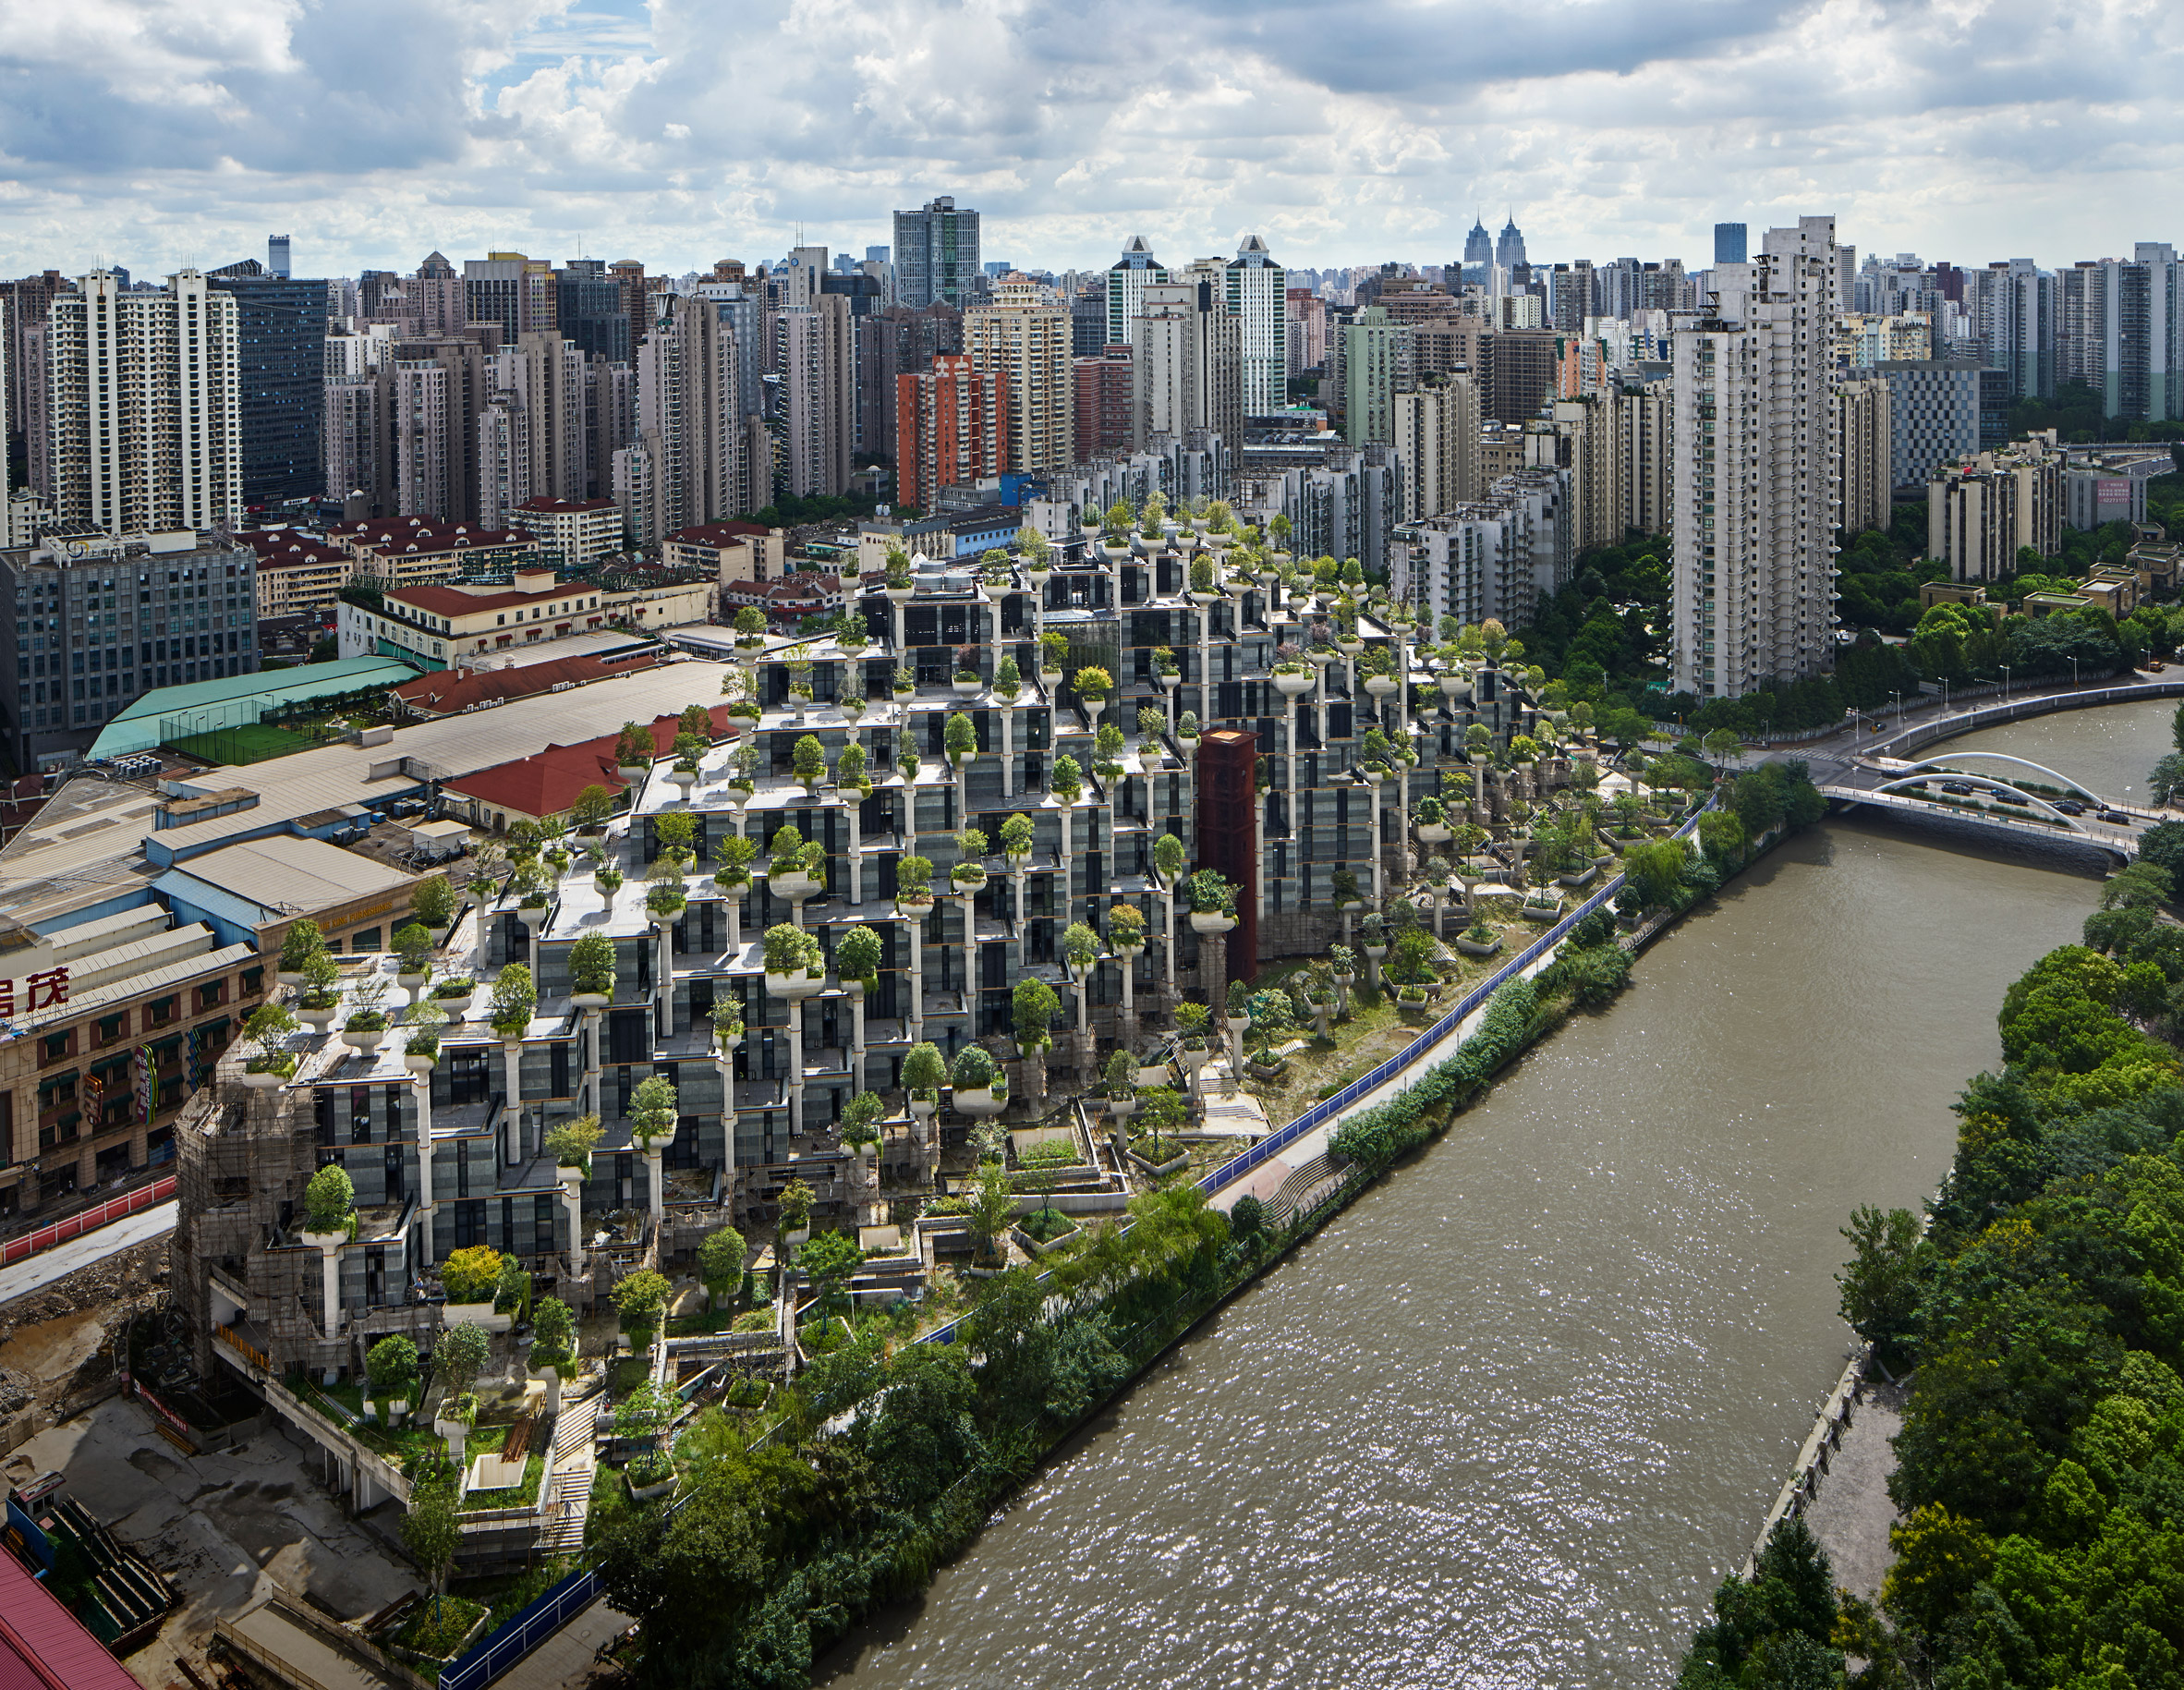 New photos of 1,000 Trees by Heatherwick Studio near completion in China